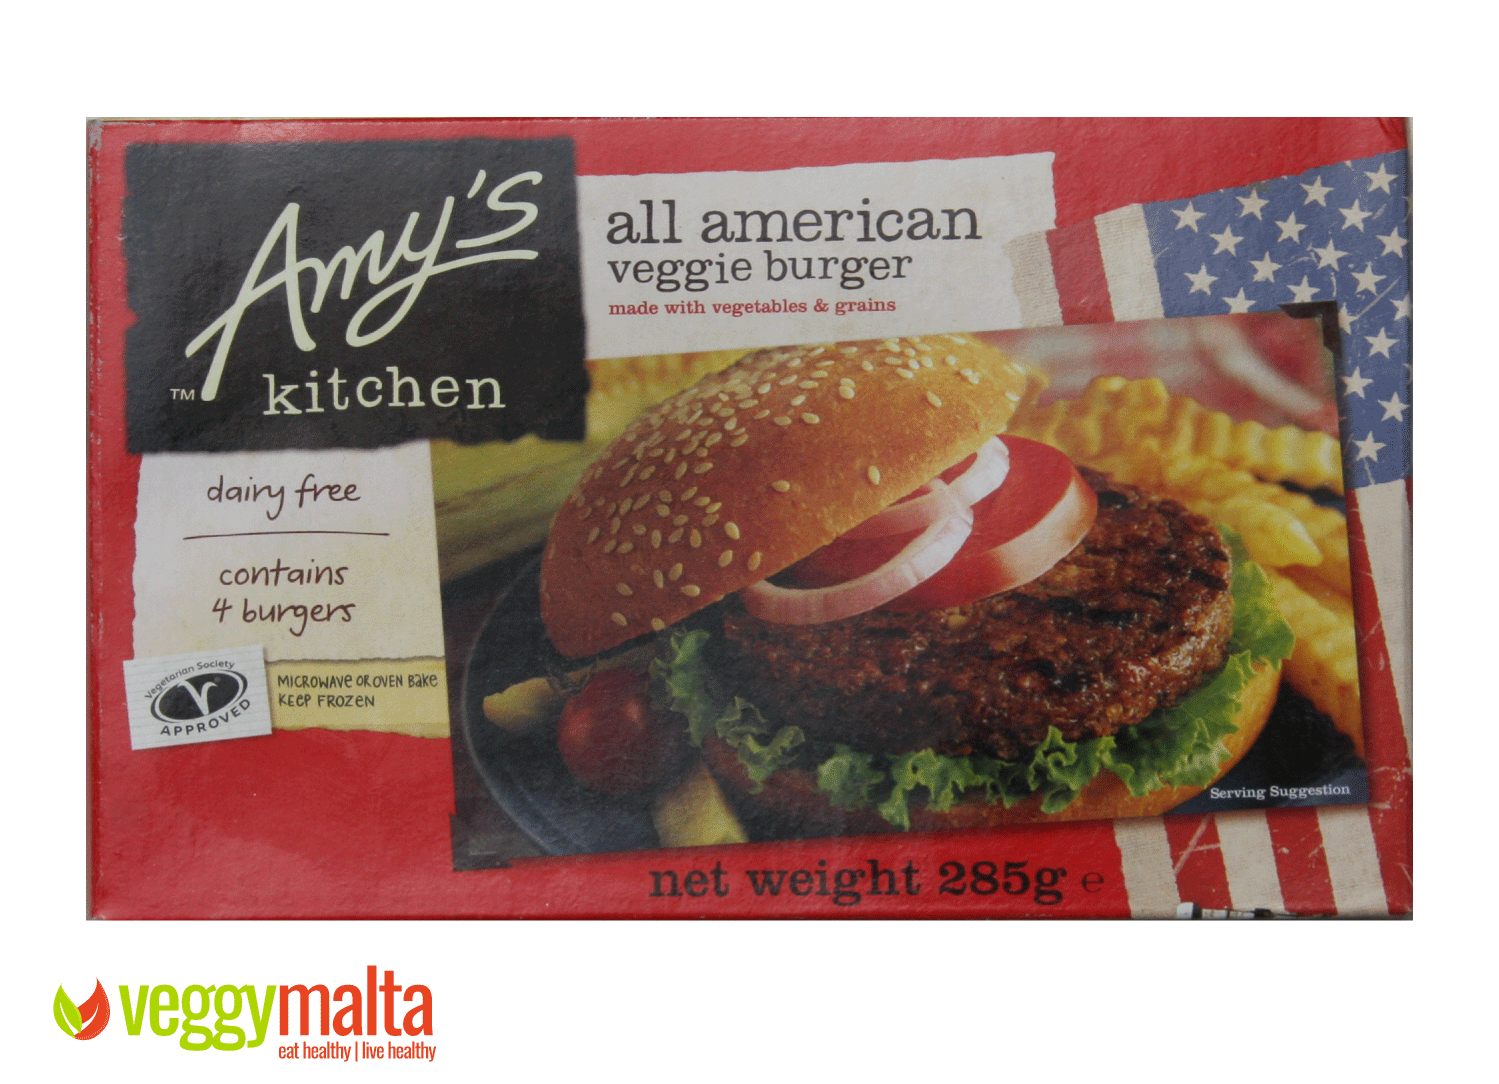 amys kitchen all american burger box rimus trading agency